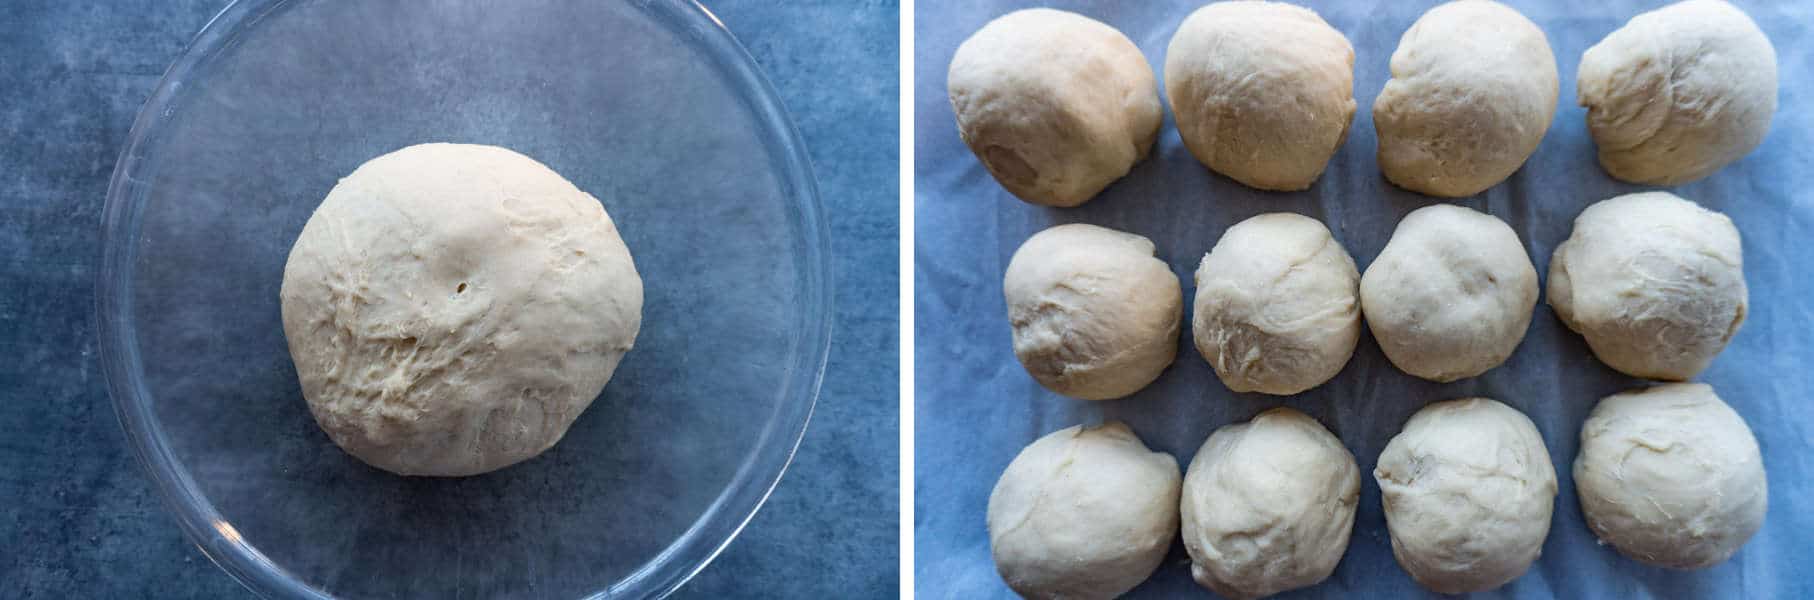 Homemade dinner rolls that are hearty and taste delicious! Is there anything better than a warm homemade dinner roll fresh from the oven? #homemade #dinnerroll #roll #bread # easy #atablefullofjoy #breadbowl